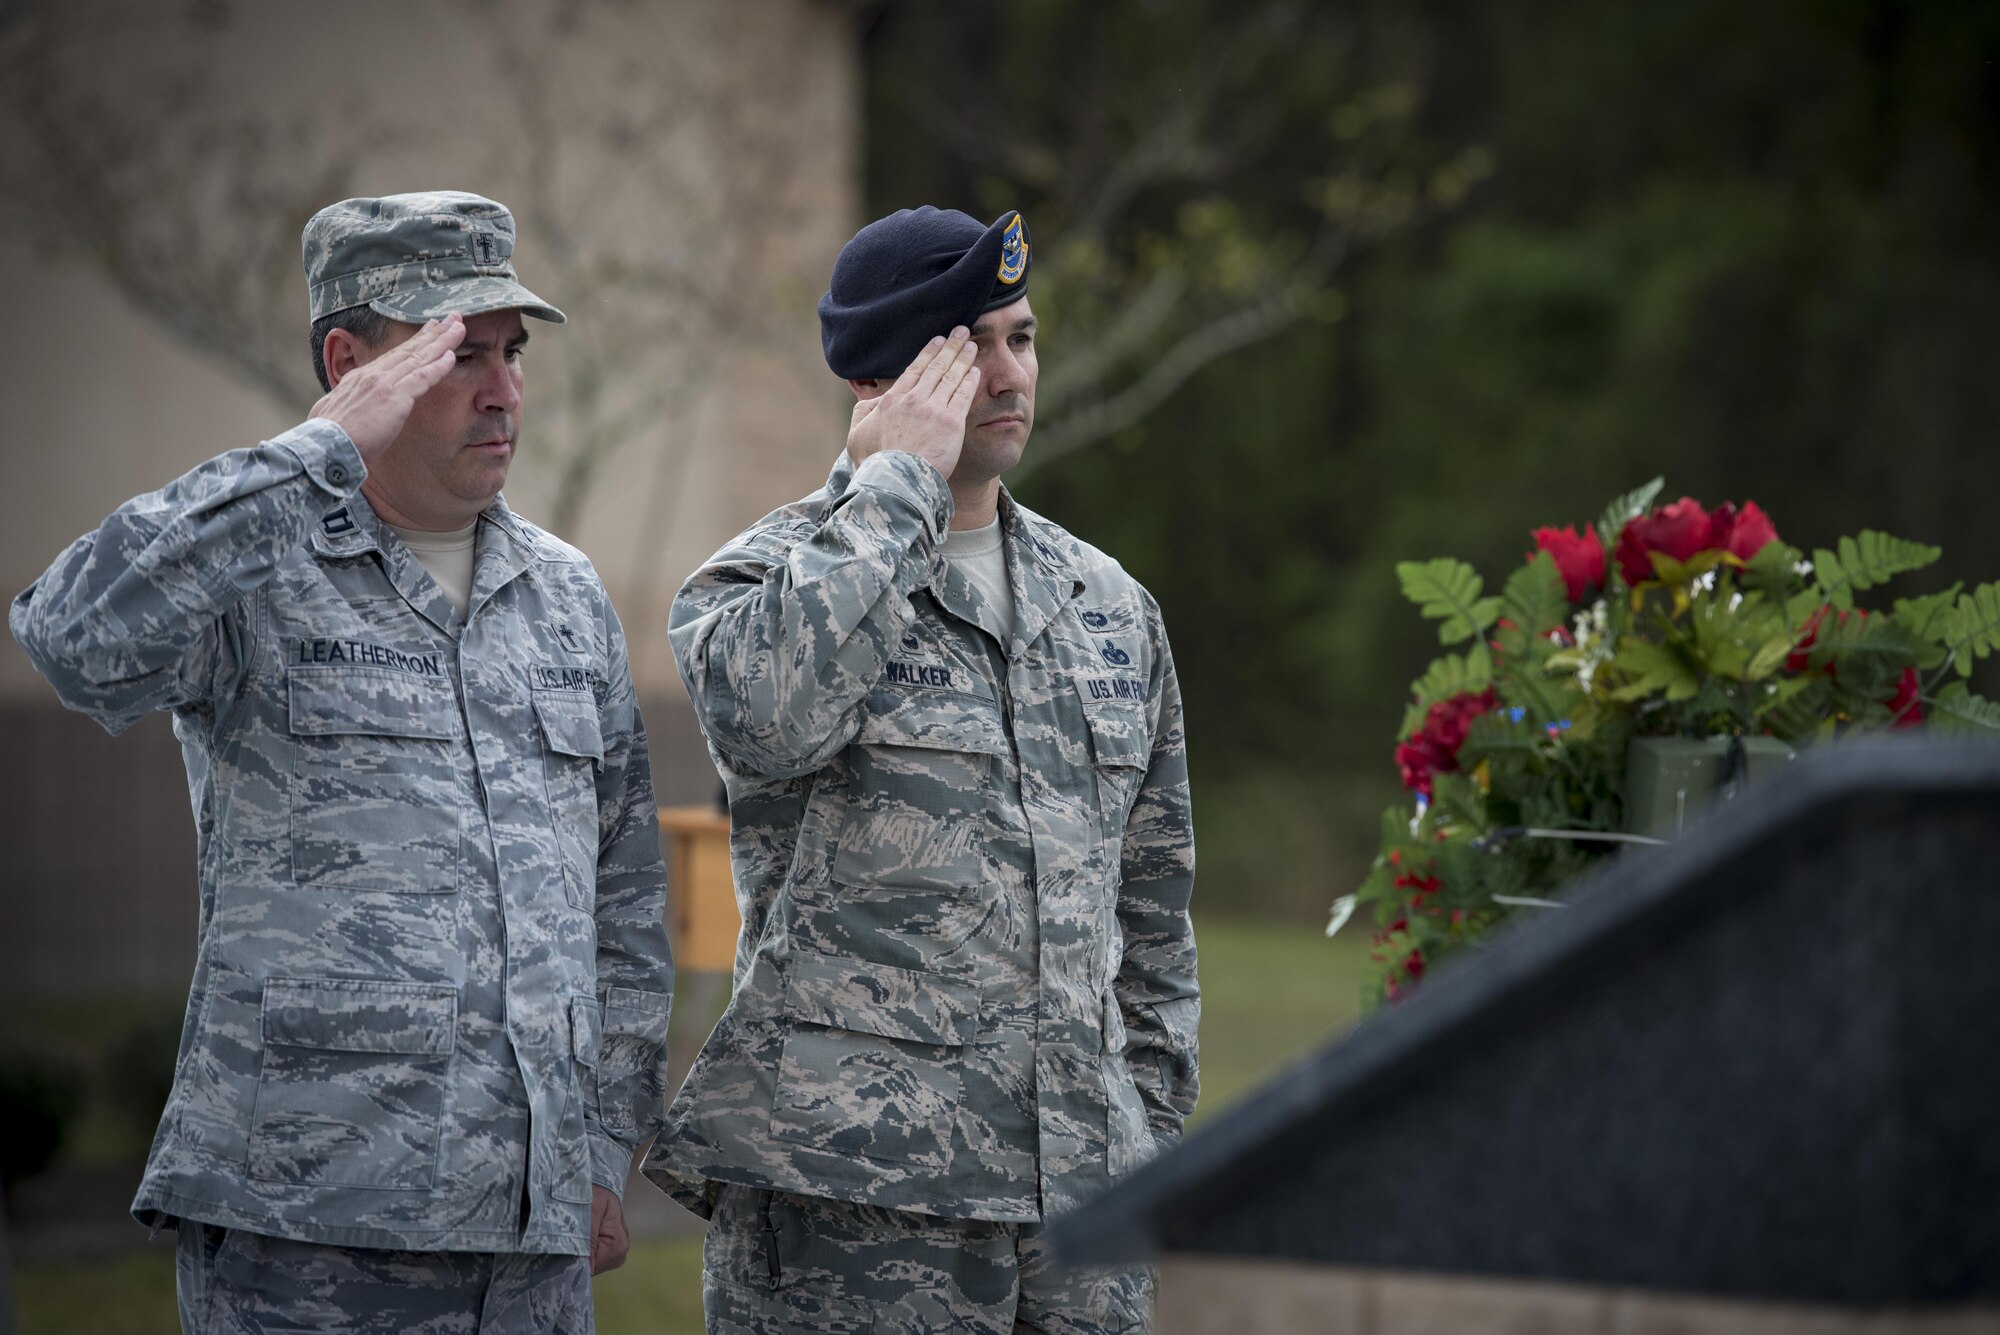 Chaplain (Capt.) Todd Leathermon, 93d Air Ground Operations Wing chaplain, left, and Col. Kevin Walker, 820th Base Defense Group commander, right, salute a wreath and memorial during the 820th BDG anniversary, March 27, 2017, at Moody Air Force Base, Ga. The anniversary commemorated 20 years since the activation of the 820th BDG and allowed guests to reminisce on their history, honor those they’ve lost, and witness a tactical demonstration. (U.S. Air Force photo by Airman 1st Class Lauren M. Sprunk)